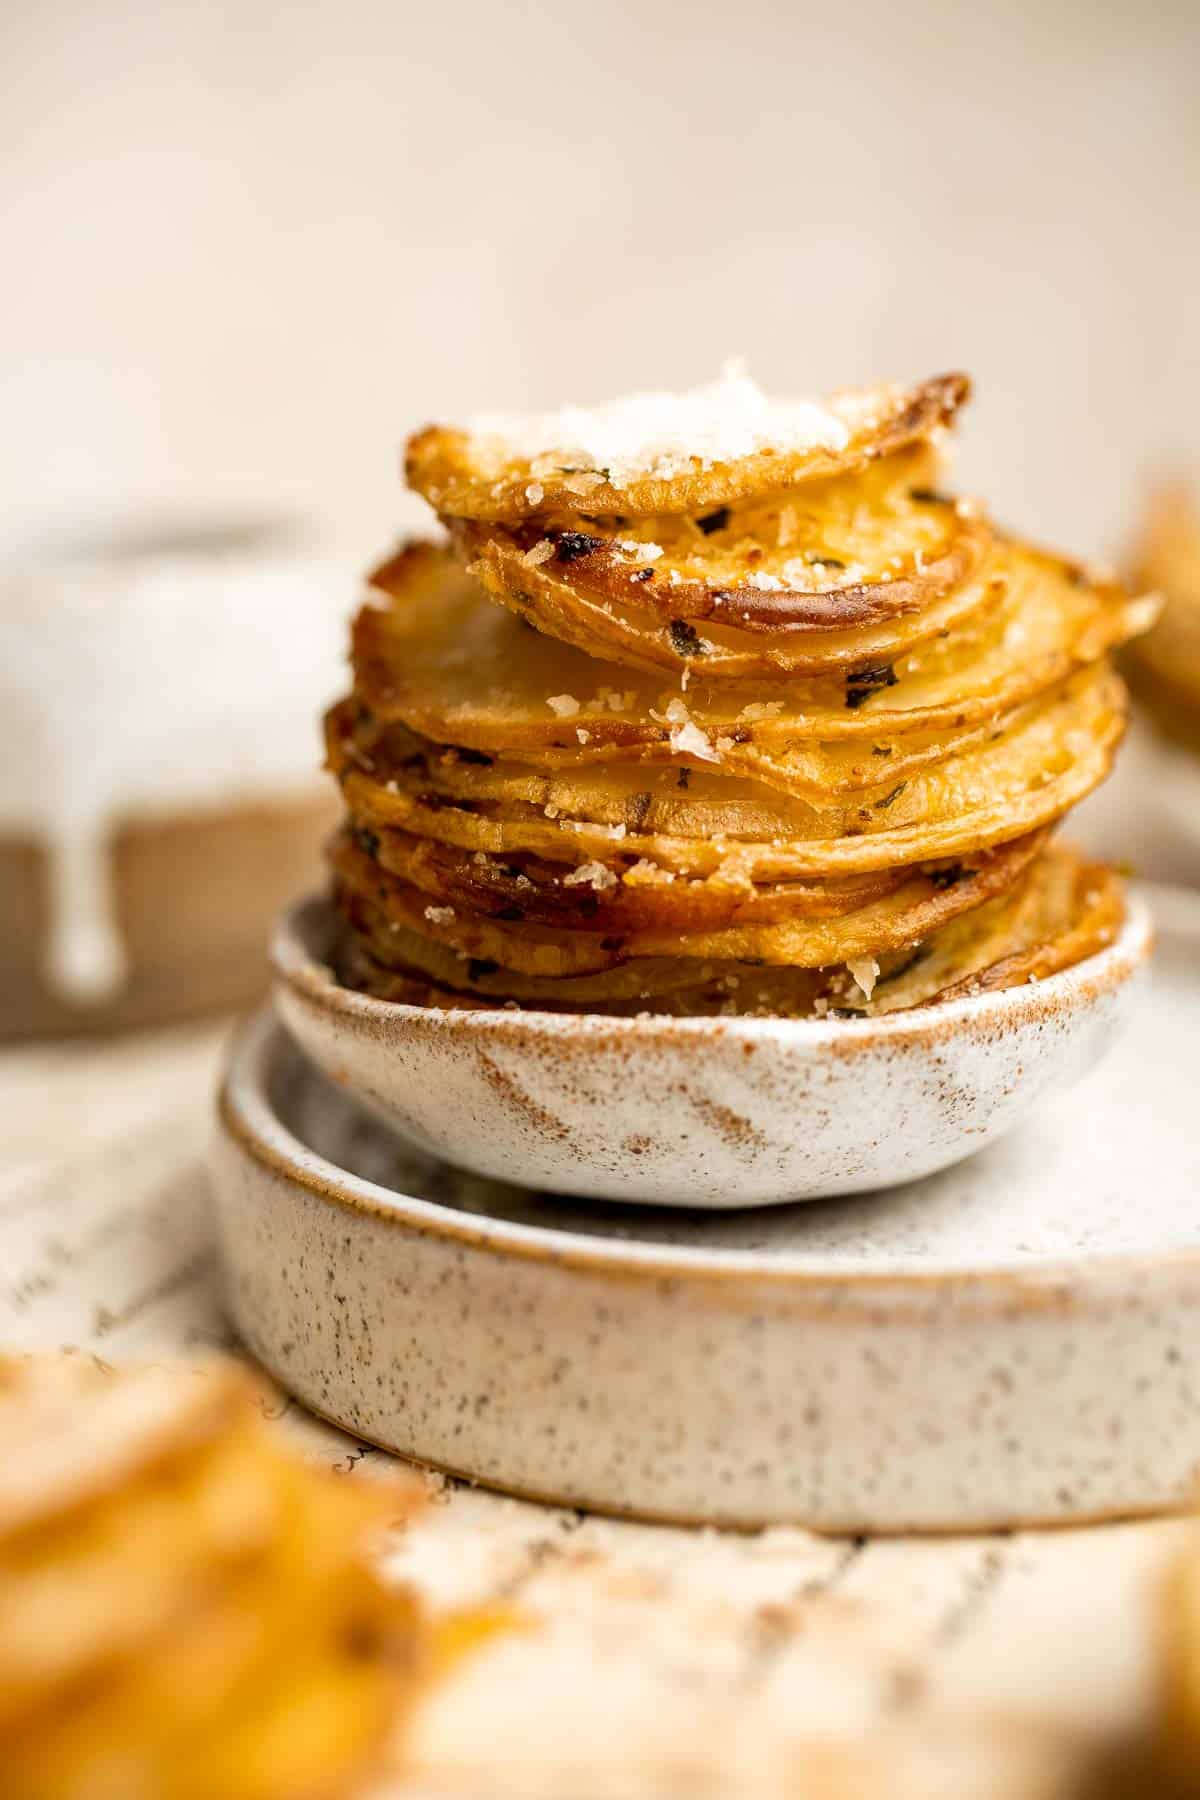 Potato Stacks are crispy, cheesy, and flavorful, making them the perfect side dish with crunchy edges and soft gooey centers bursting with amazing flavor. | aheadofthyme.com